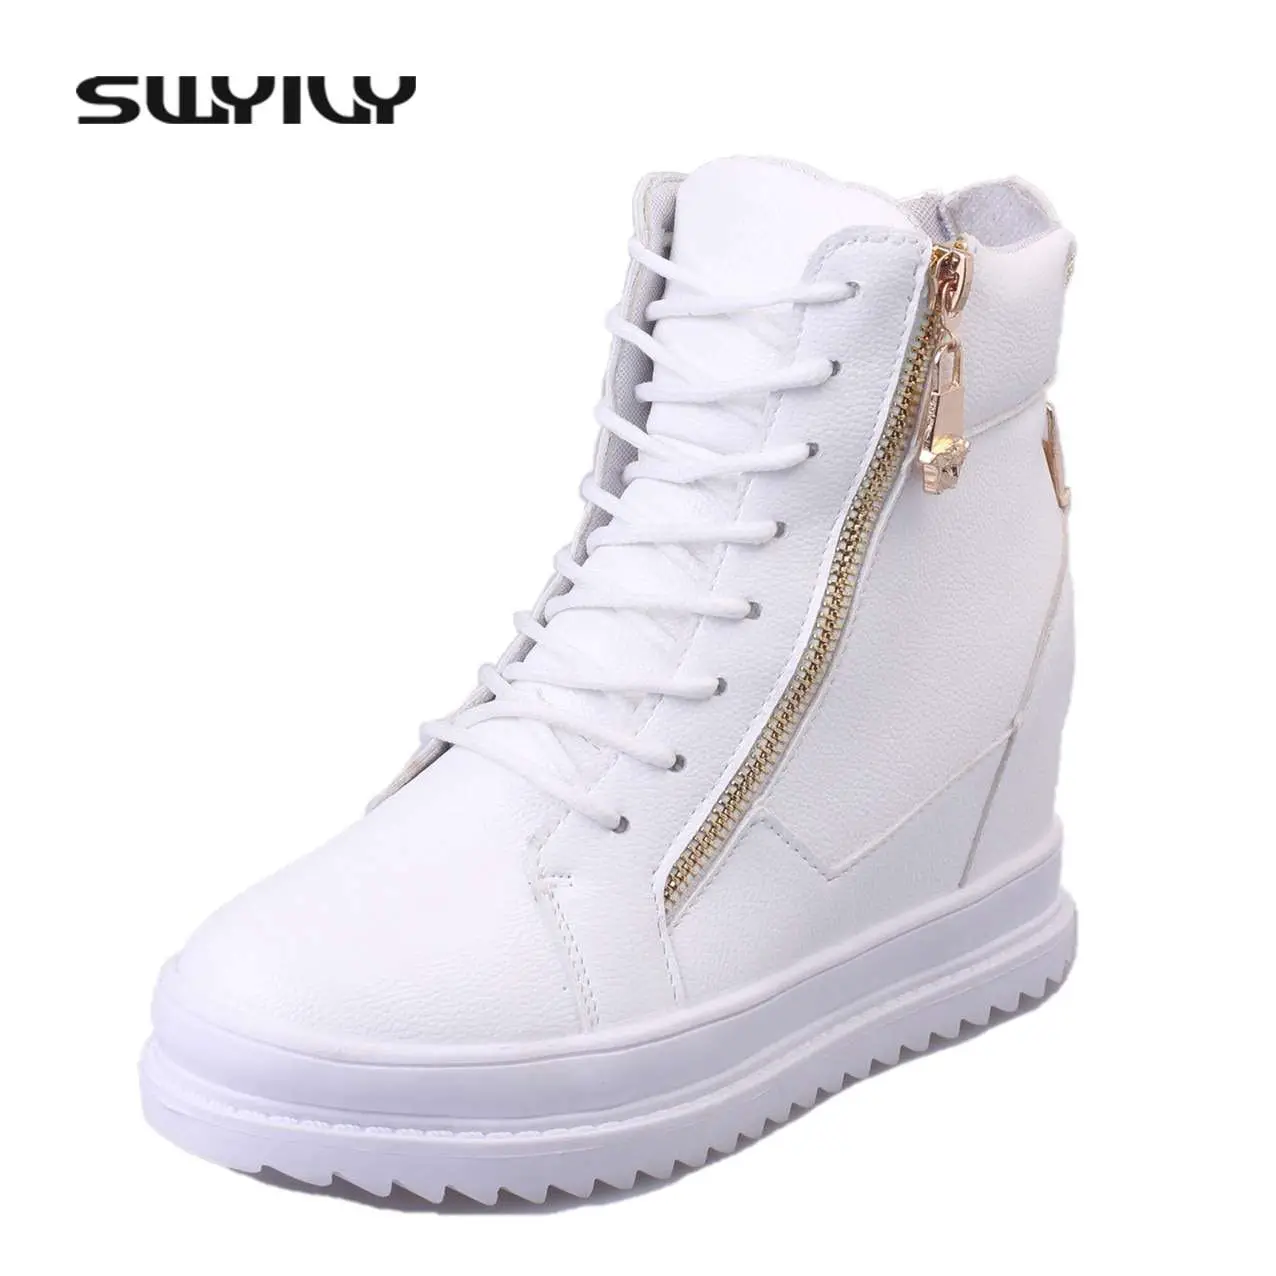 SWYIVY Women Sneaker White High Top Canvas Shoes Wedge ...